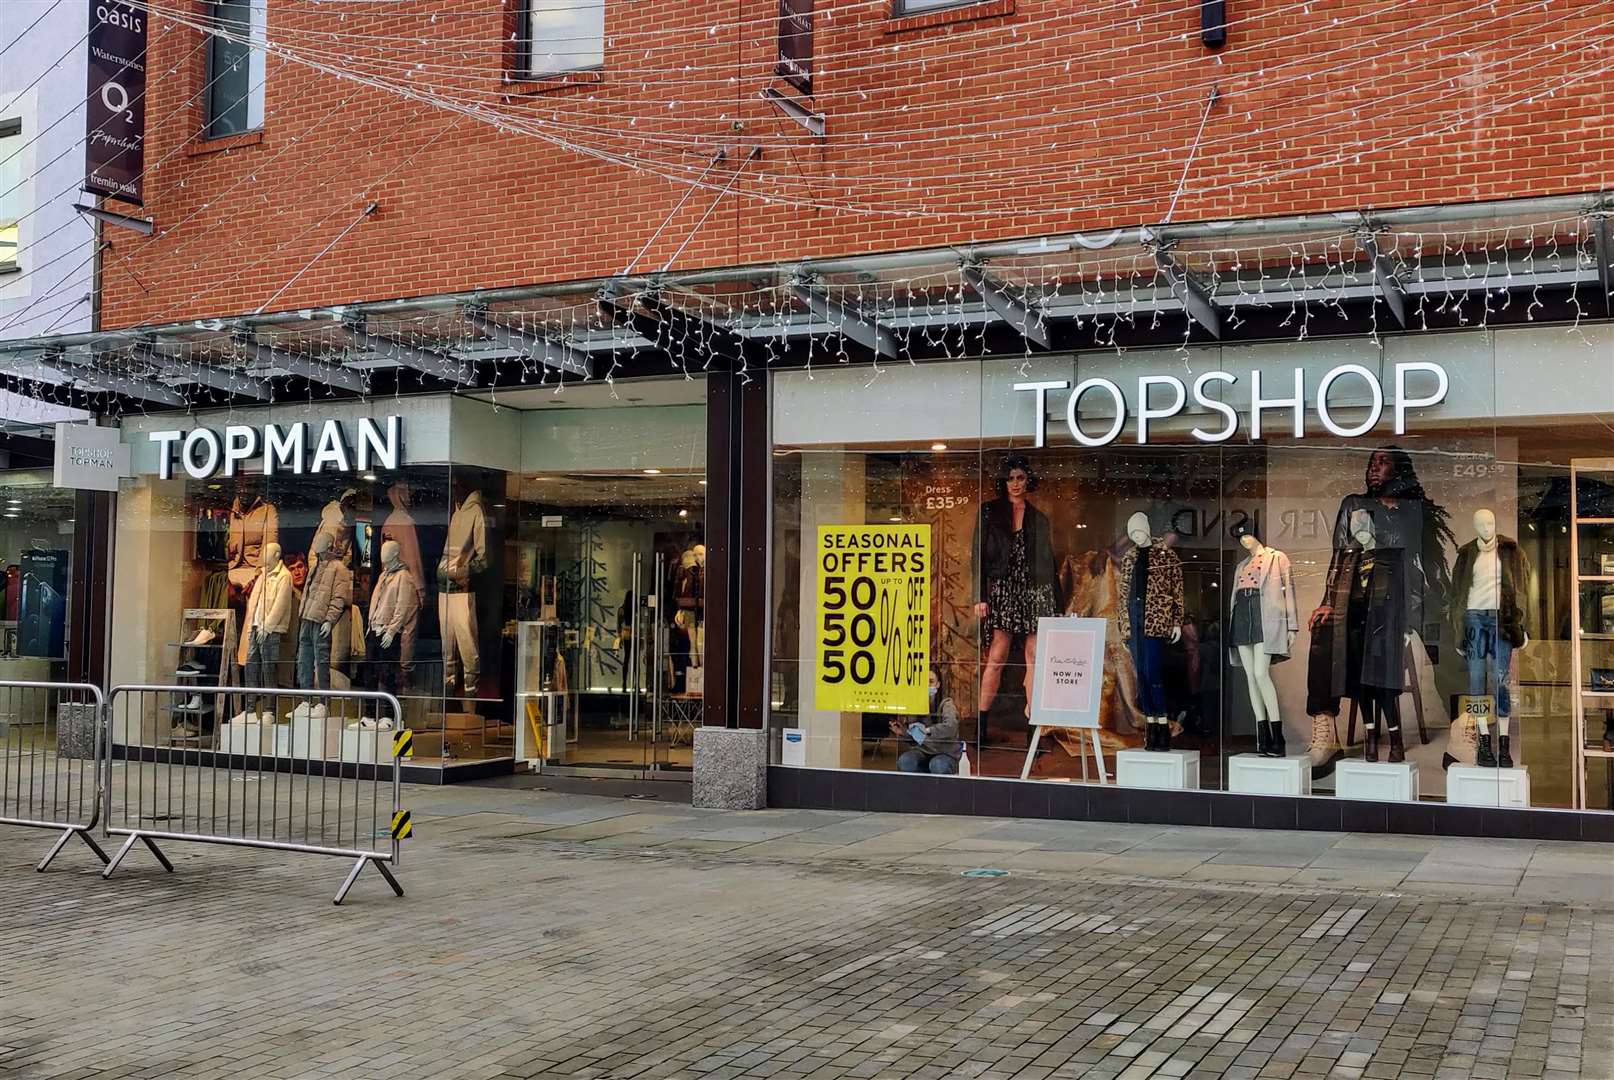 Topshop went into administration and was forced to close